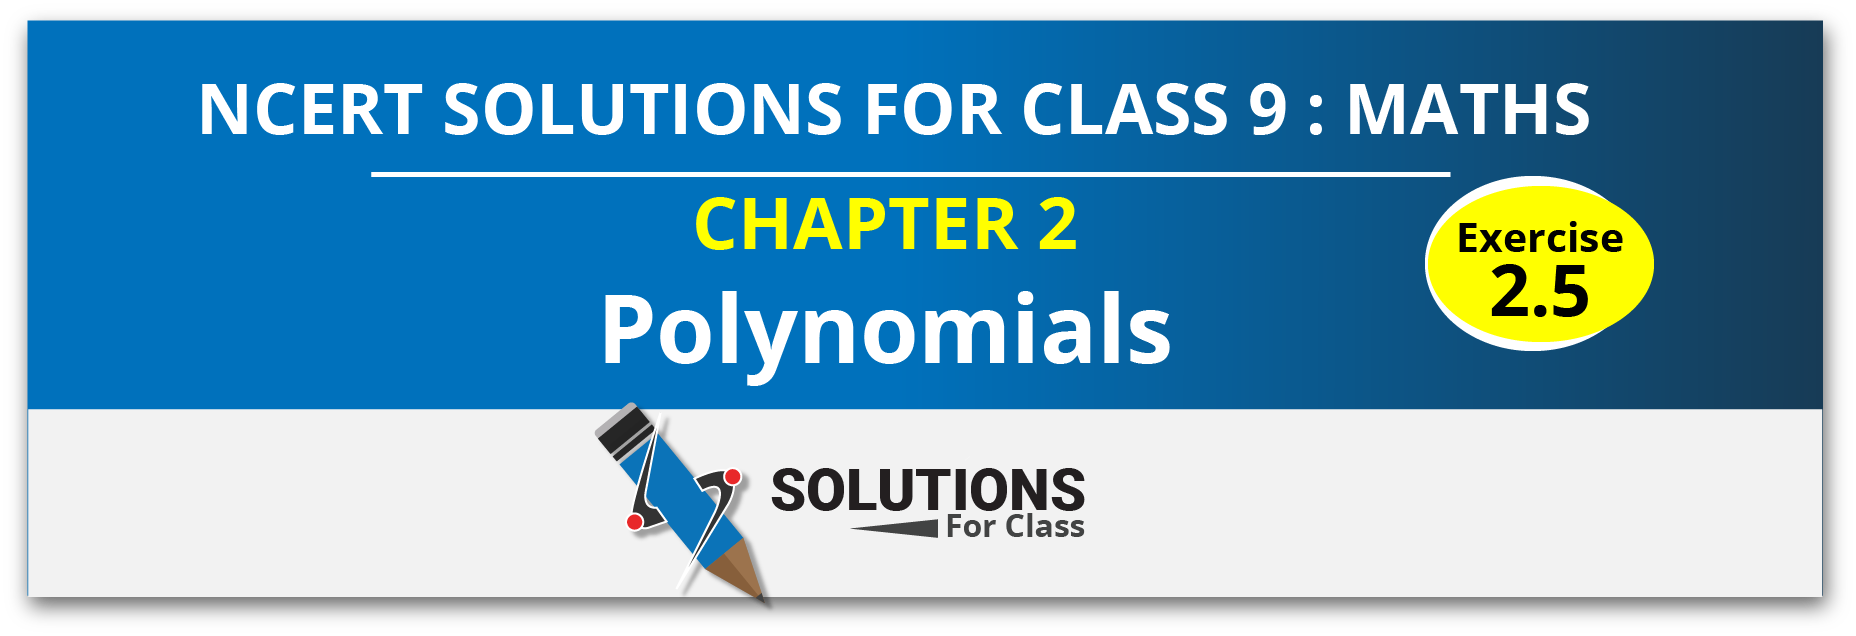 NCERT Solution For Class 9, Maths, Chapter 2, Polynomials, Exercise 2.5